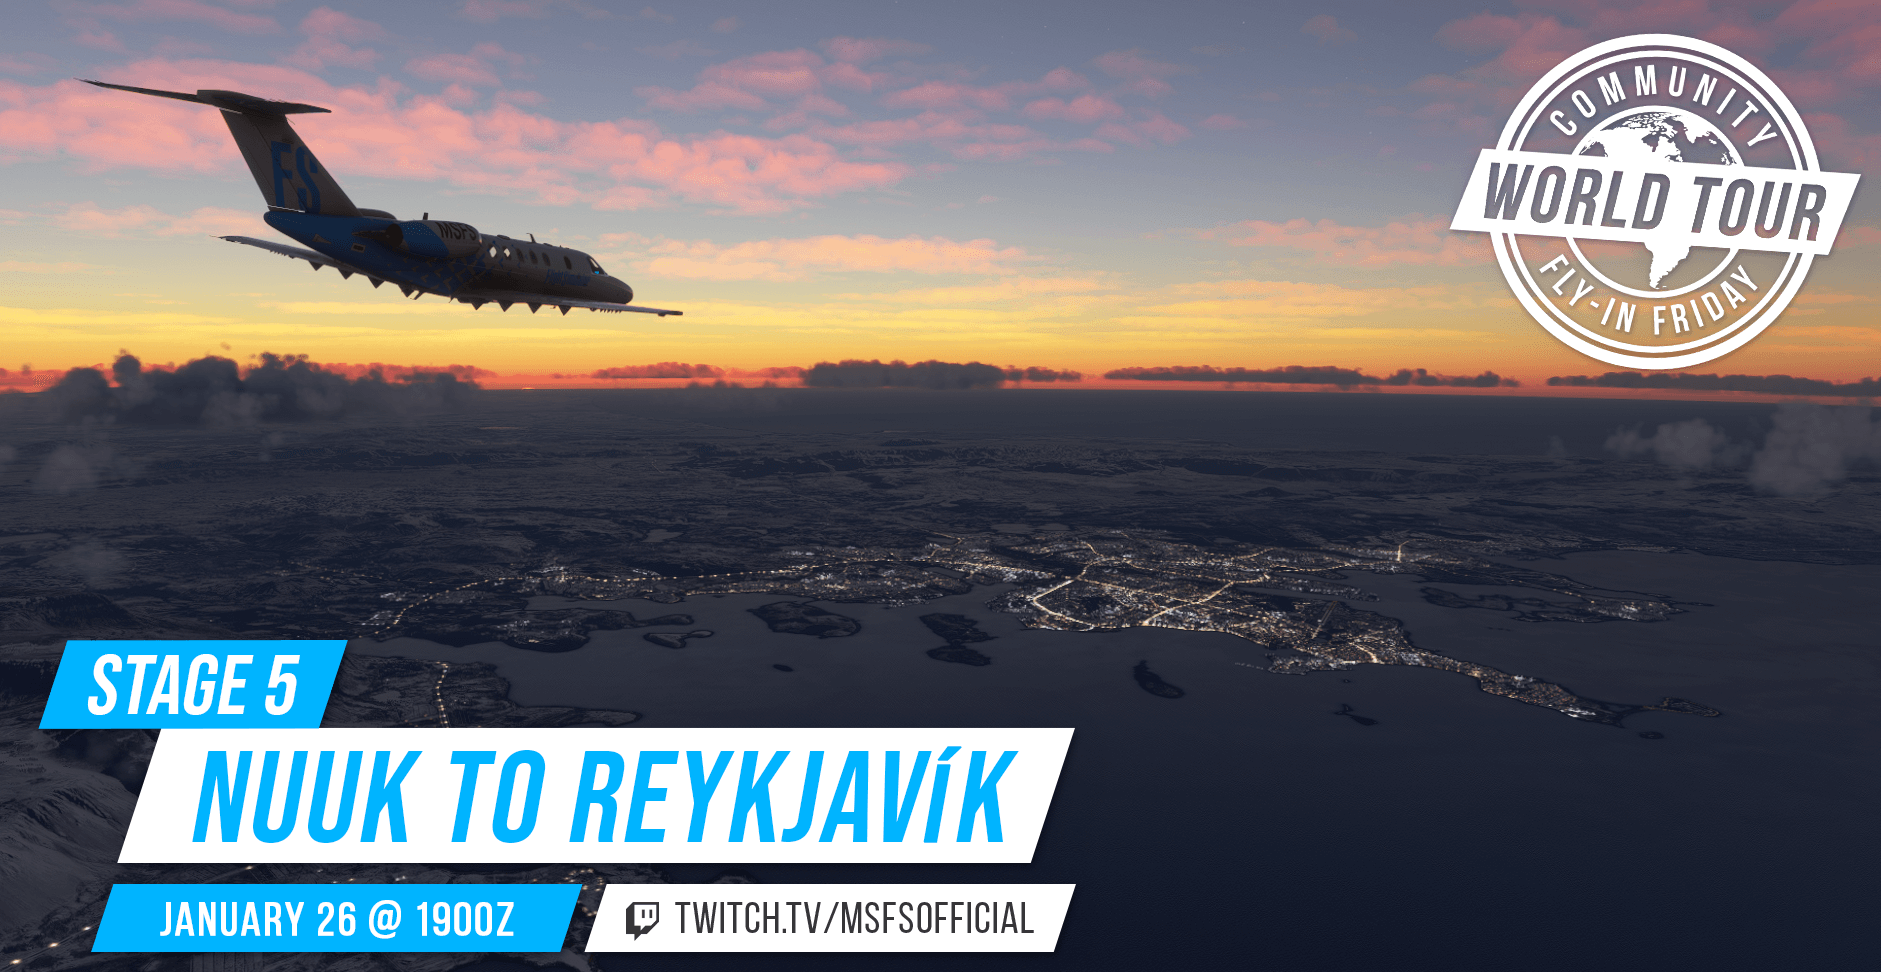 Community Fly In: World Tour. Stage 5: Nuuk to Reykjavik. January 26th at 1900Z. Watch at Twitch.tv/msfsofficial